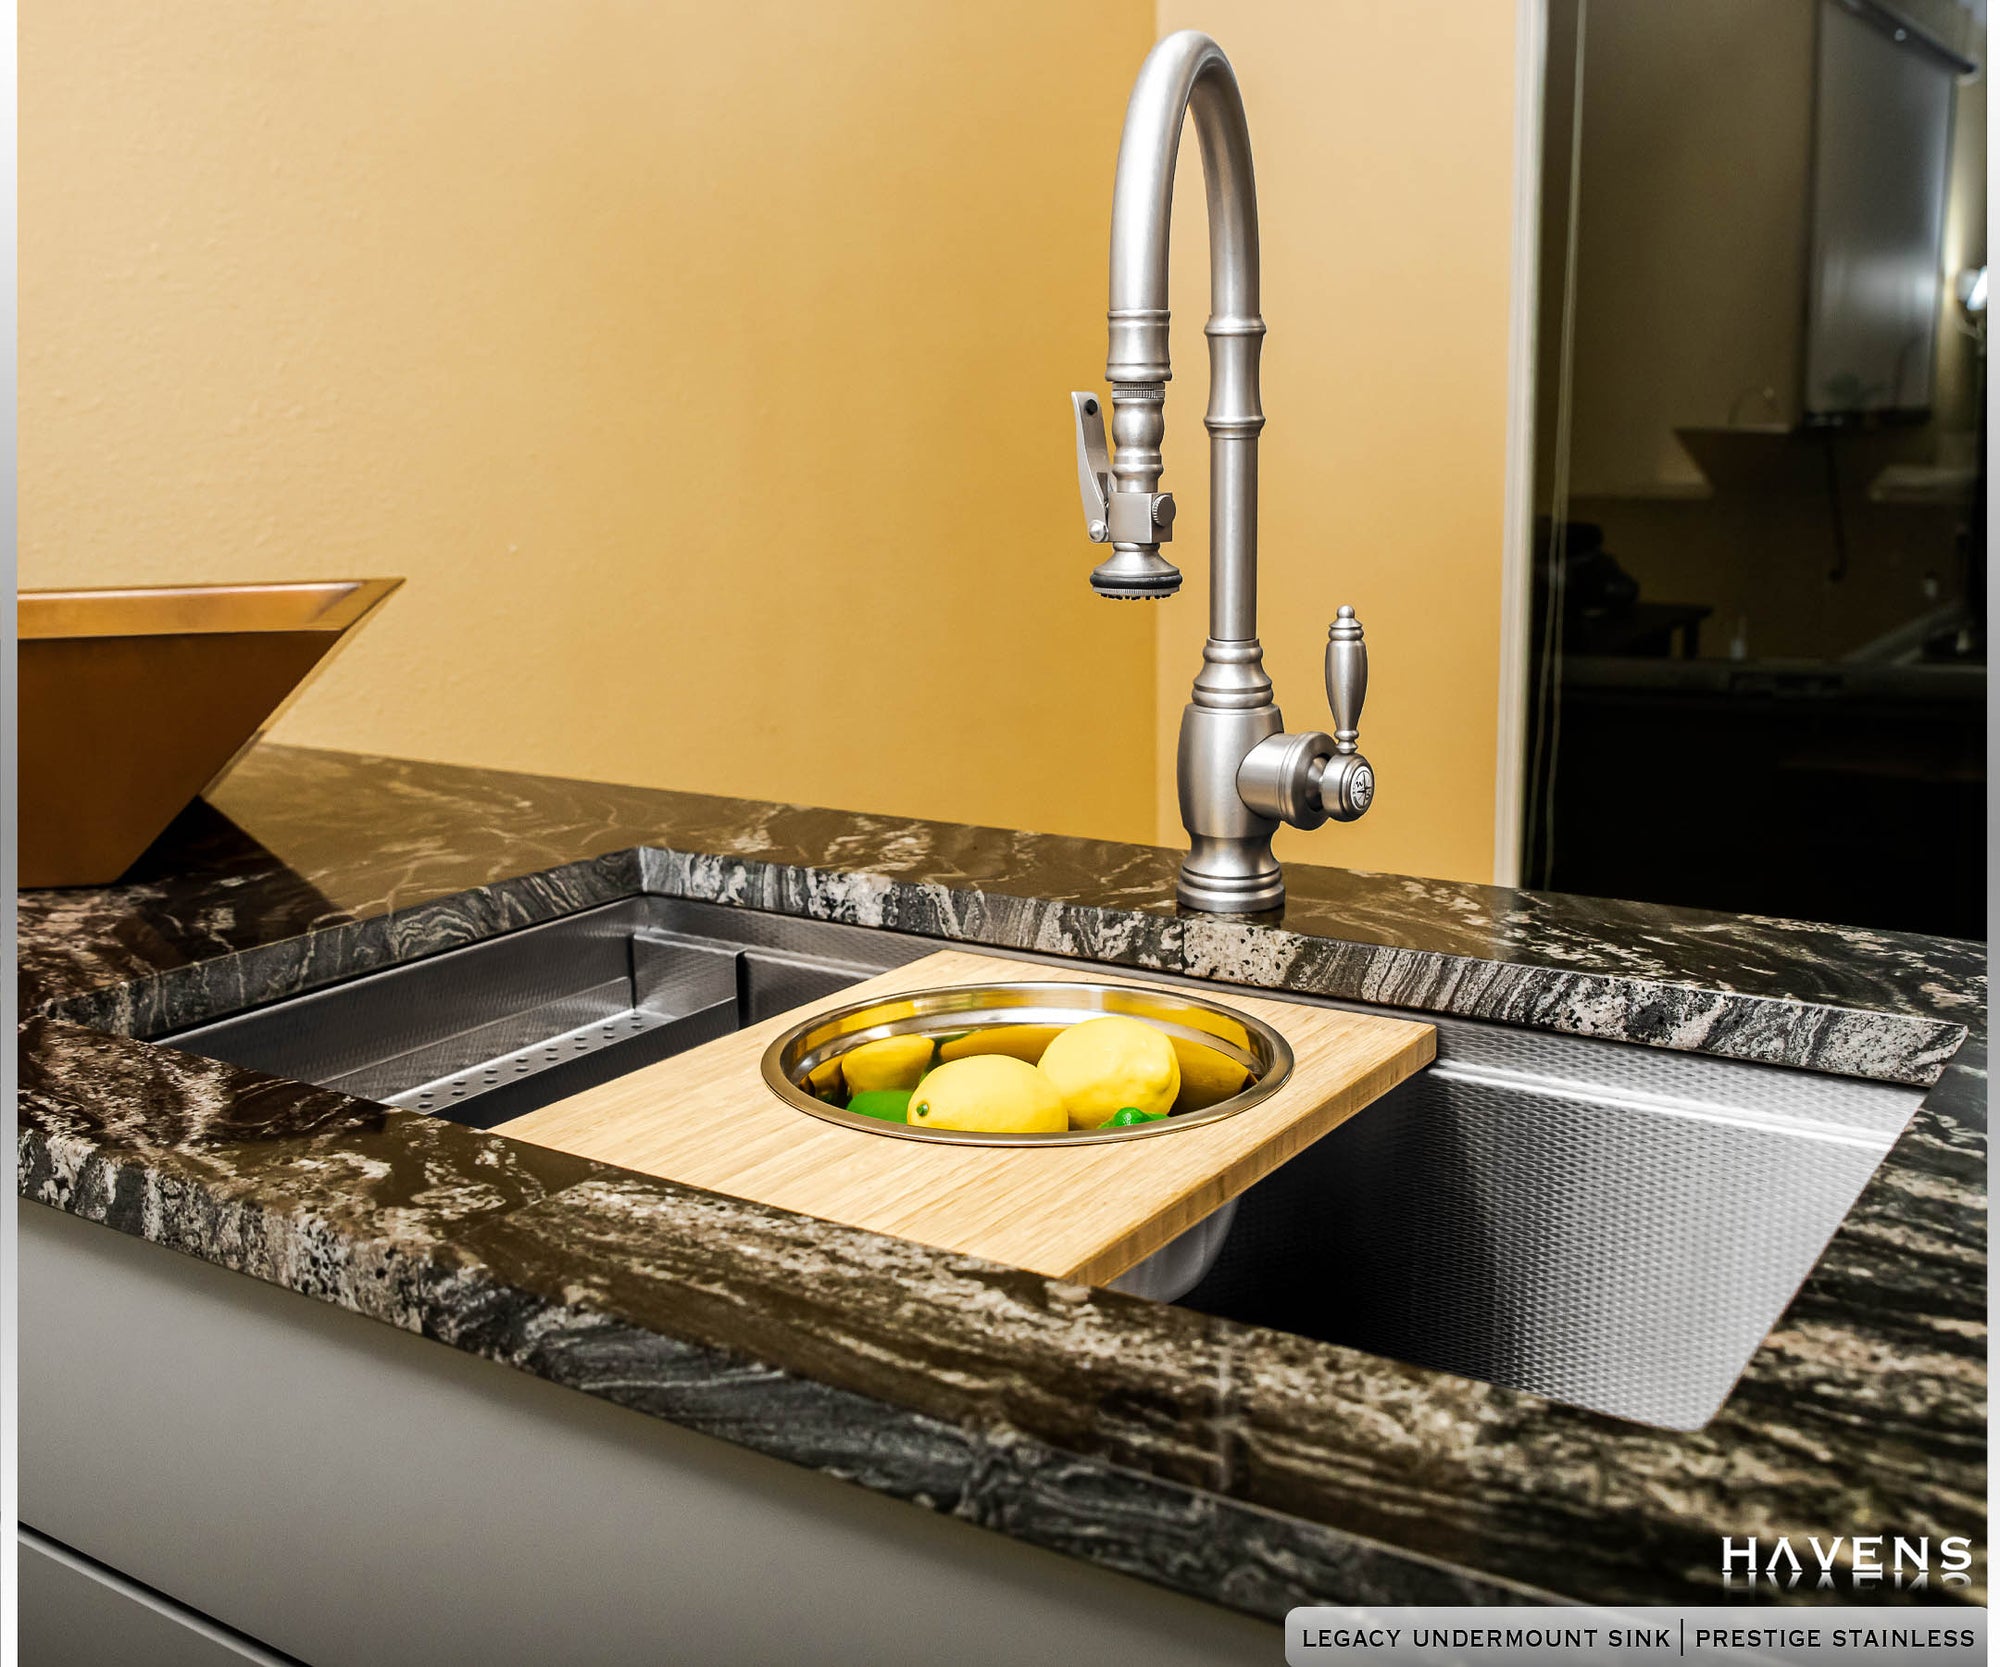 Legacy Undermount Sink with Mixing Bowl Cutting Board holding lemons in stainless steel bowl